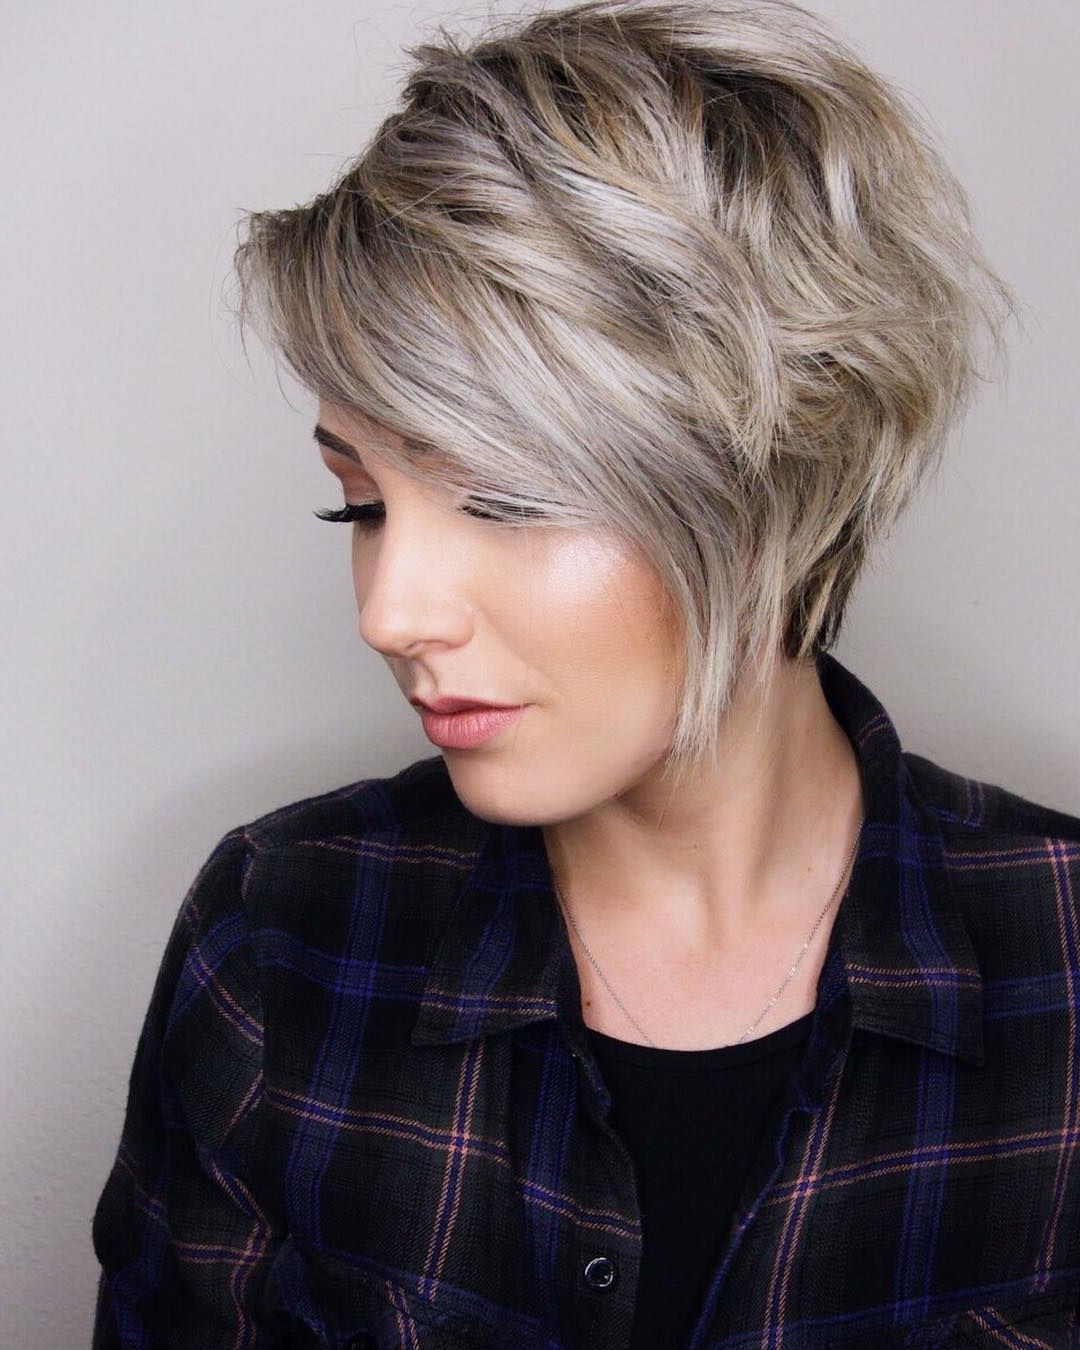 10 Trendy Layered Short Haircut Ideas For 2017  2018 – 'extra Pertaining To Asymmetrical Short Haircuts For Women (View 24 of 25)